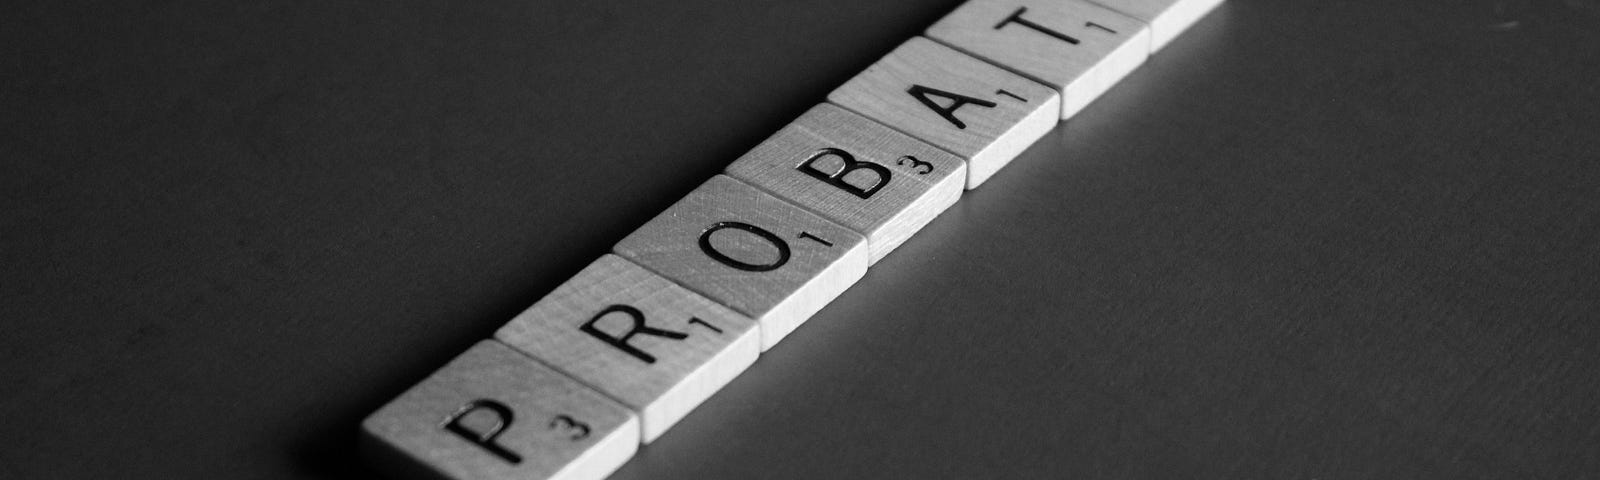 A black and white photo shows wooden Scrabble tiles that are placed on a flat surface. The letters on the tiles form the word “PROBATE.” The tiles are set at an angle.